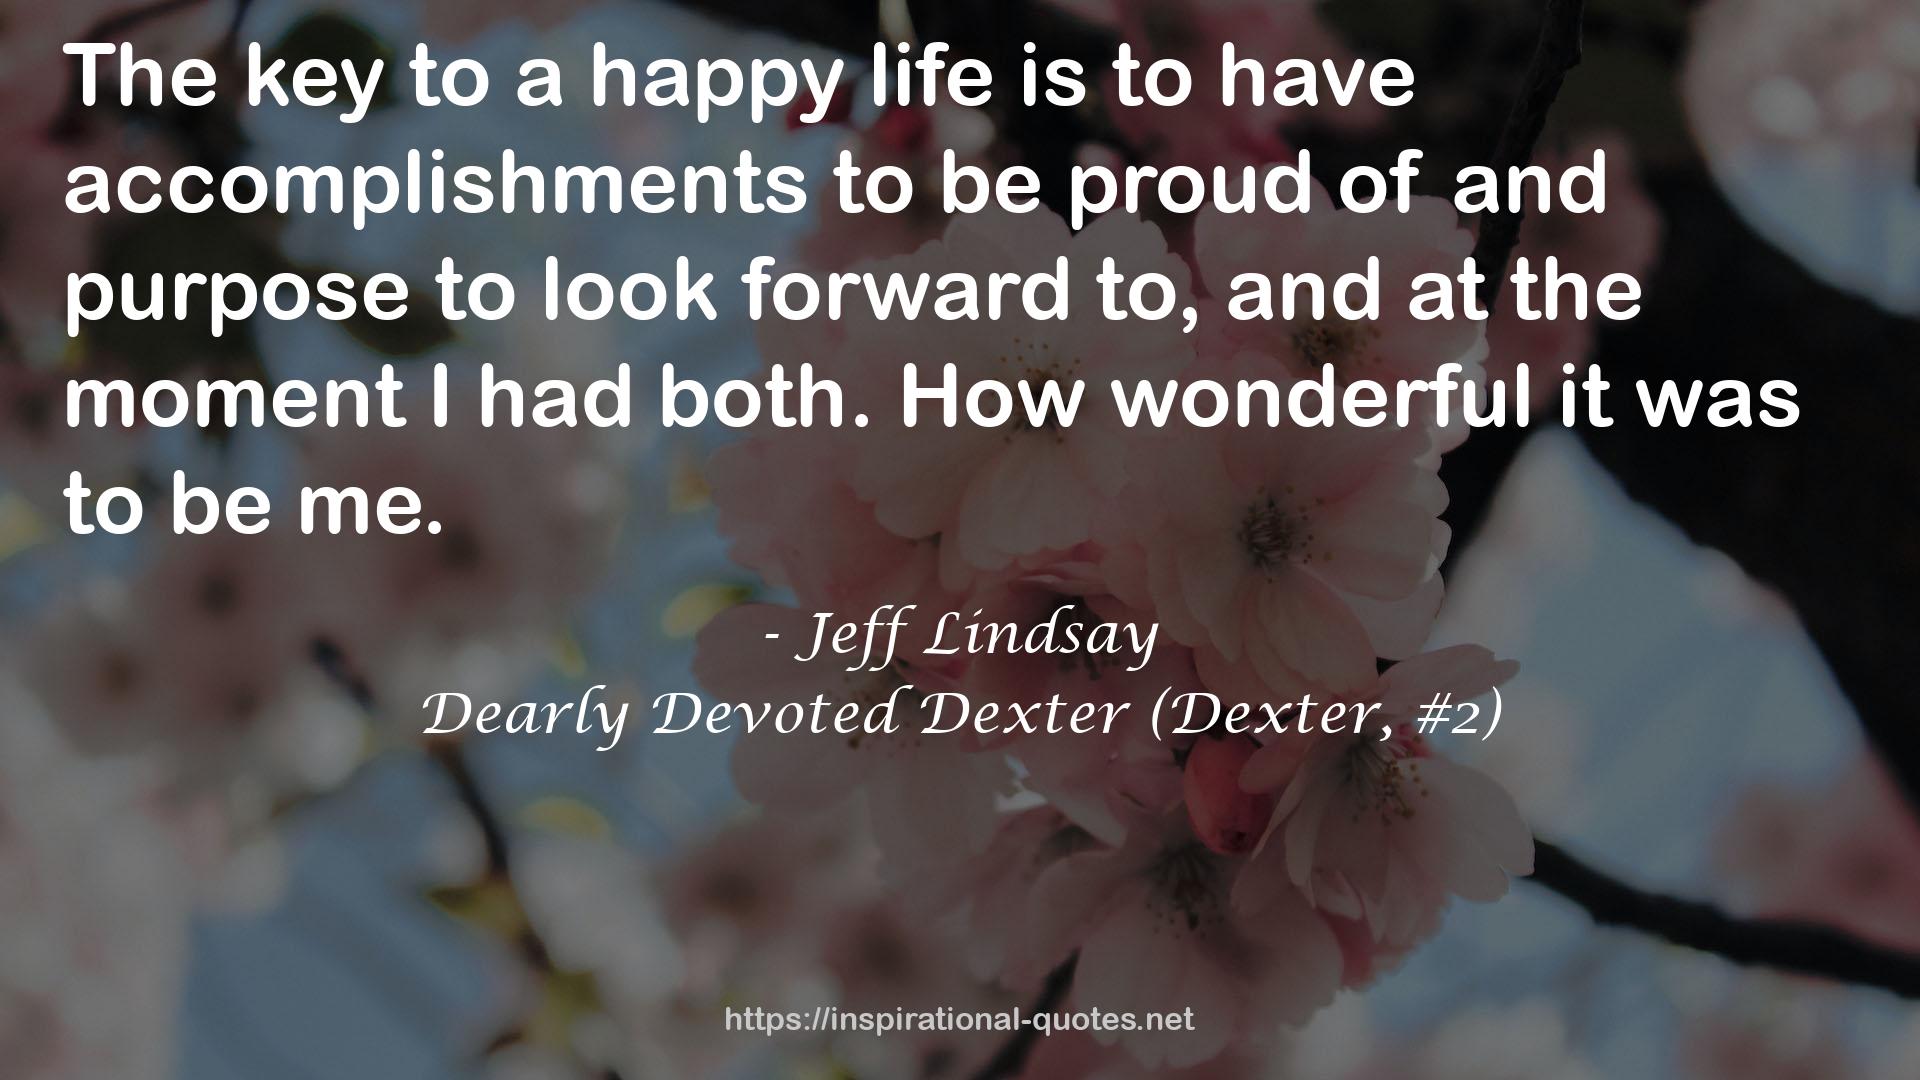 Dearly Devoted Dexter (Dexter, #2) QUOTES